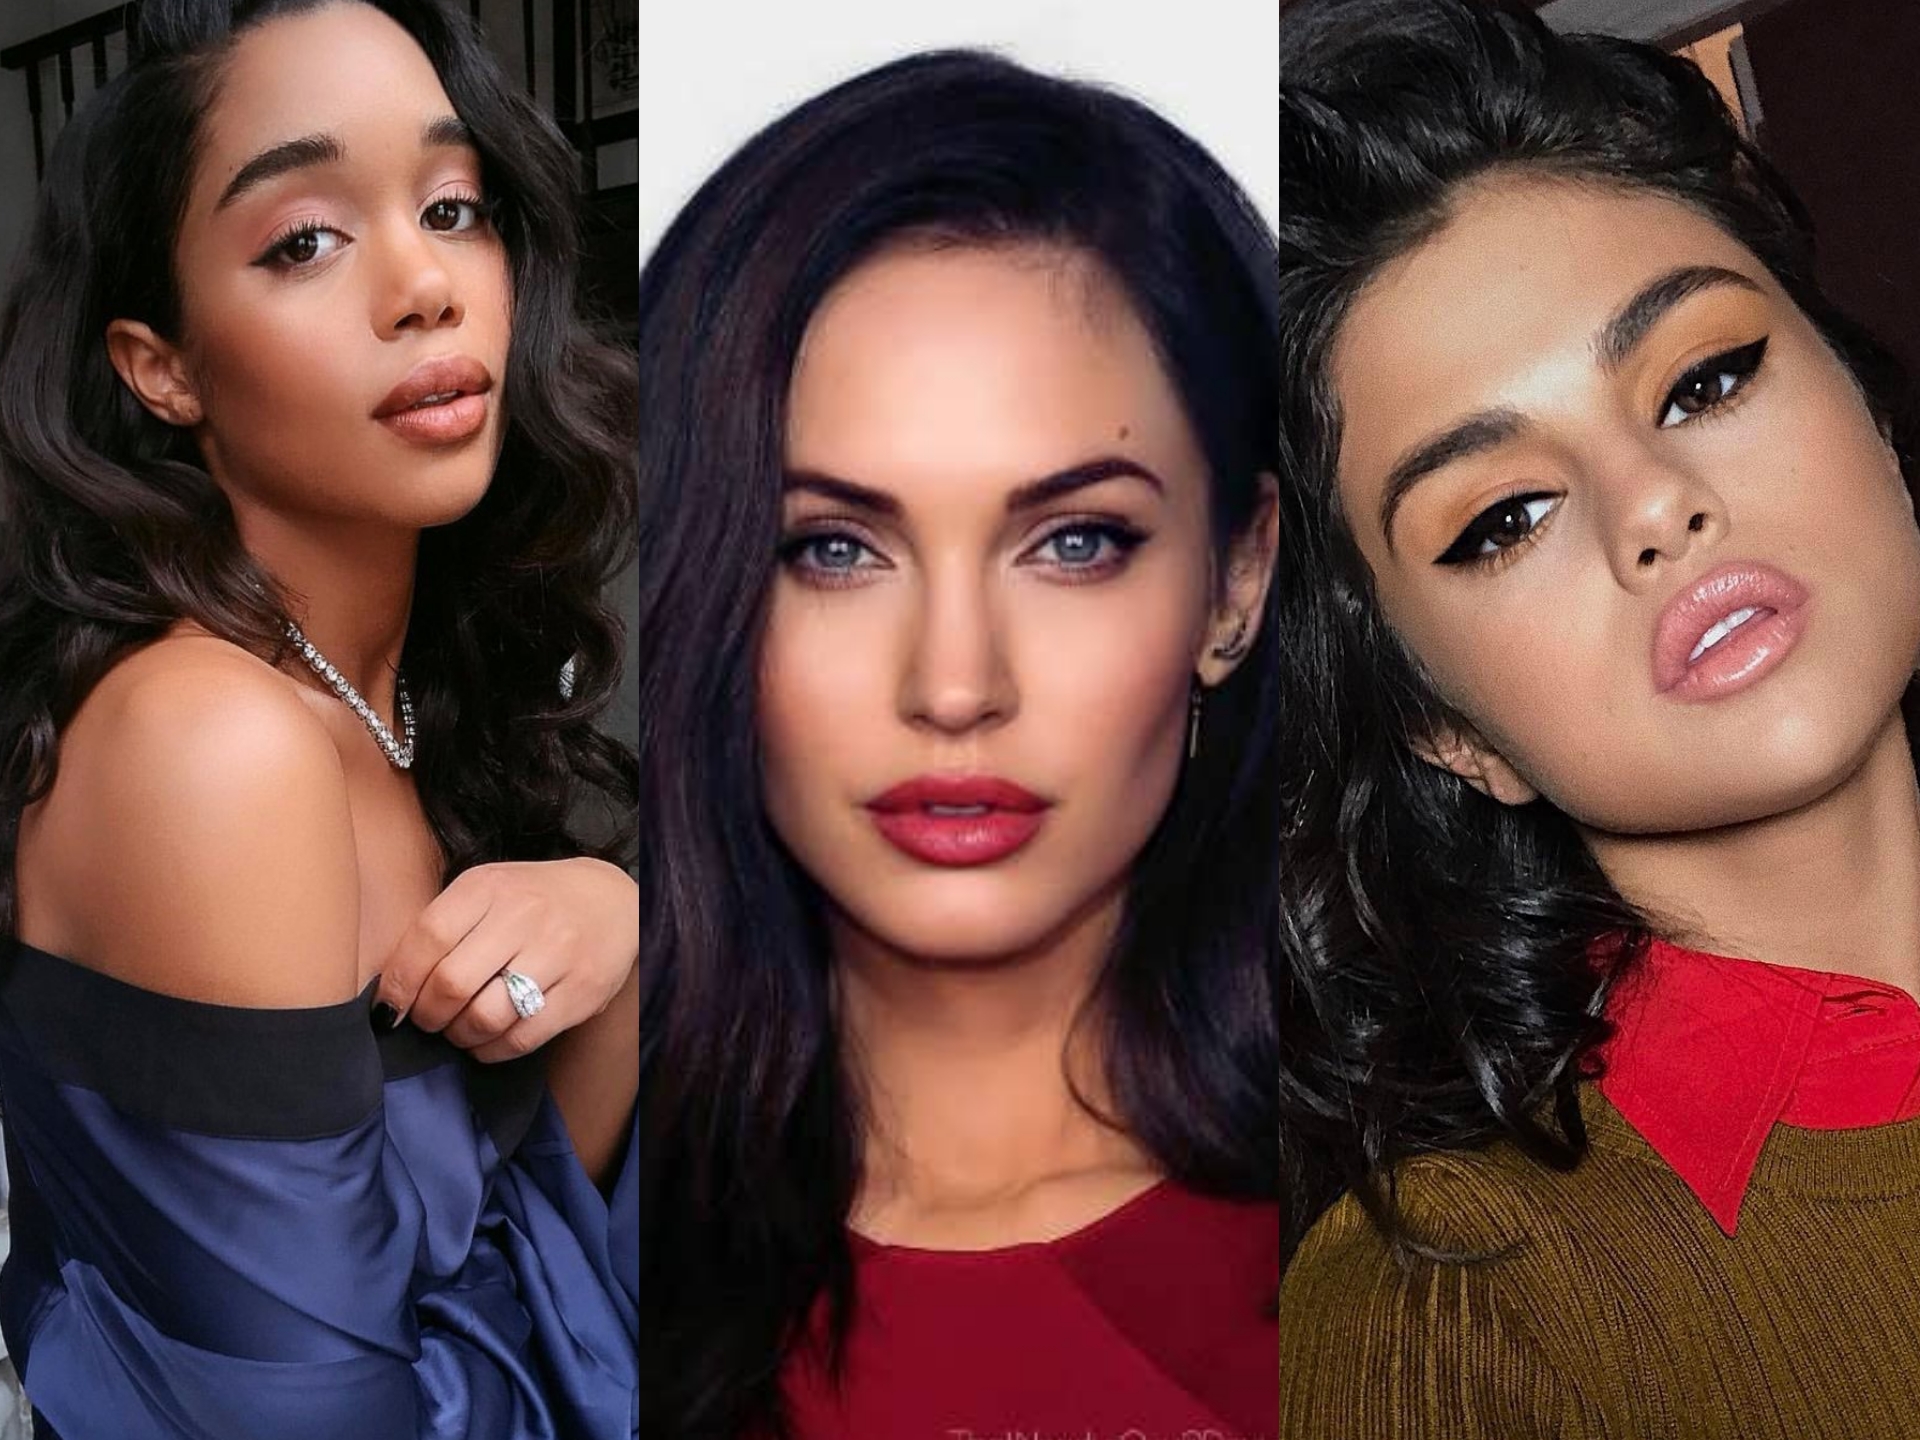 Laura Harrier Megan Fox Selena Gomez Who Would Be Your Submissive